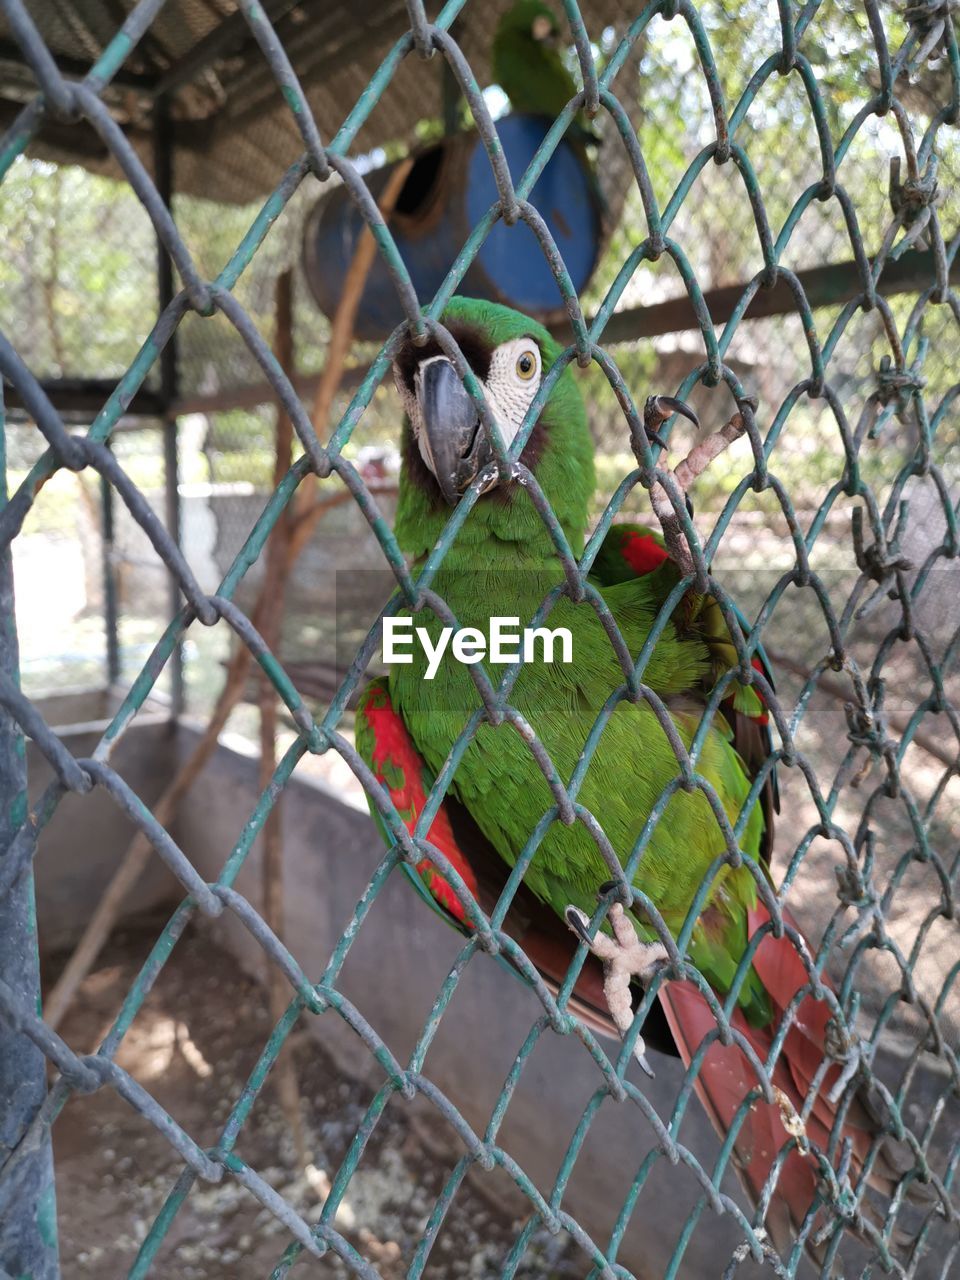 animal themes, animal, bird, pet, fence, parrot, animal wildlife, zoo, animals in captivity, chainlink fence, one animal, metal, cage, no people, wildlife, security, focus on foreground, day, protection, nature, outdoors, birdcage, close-up